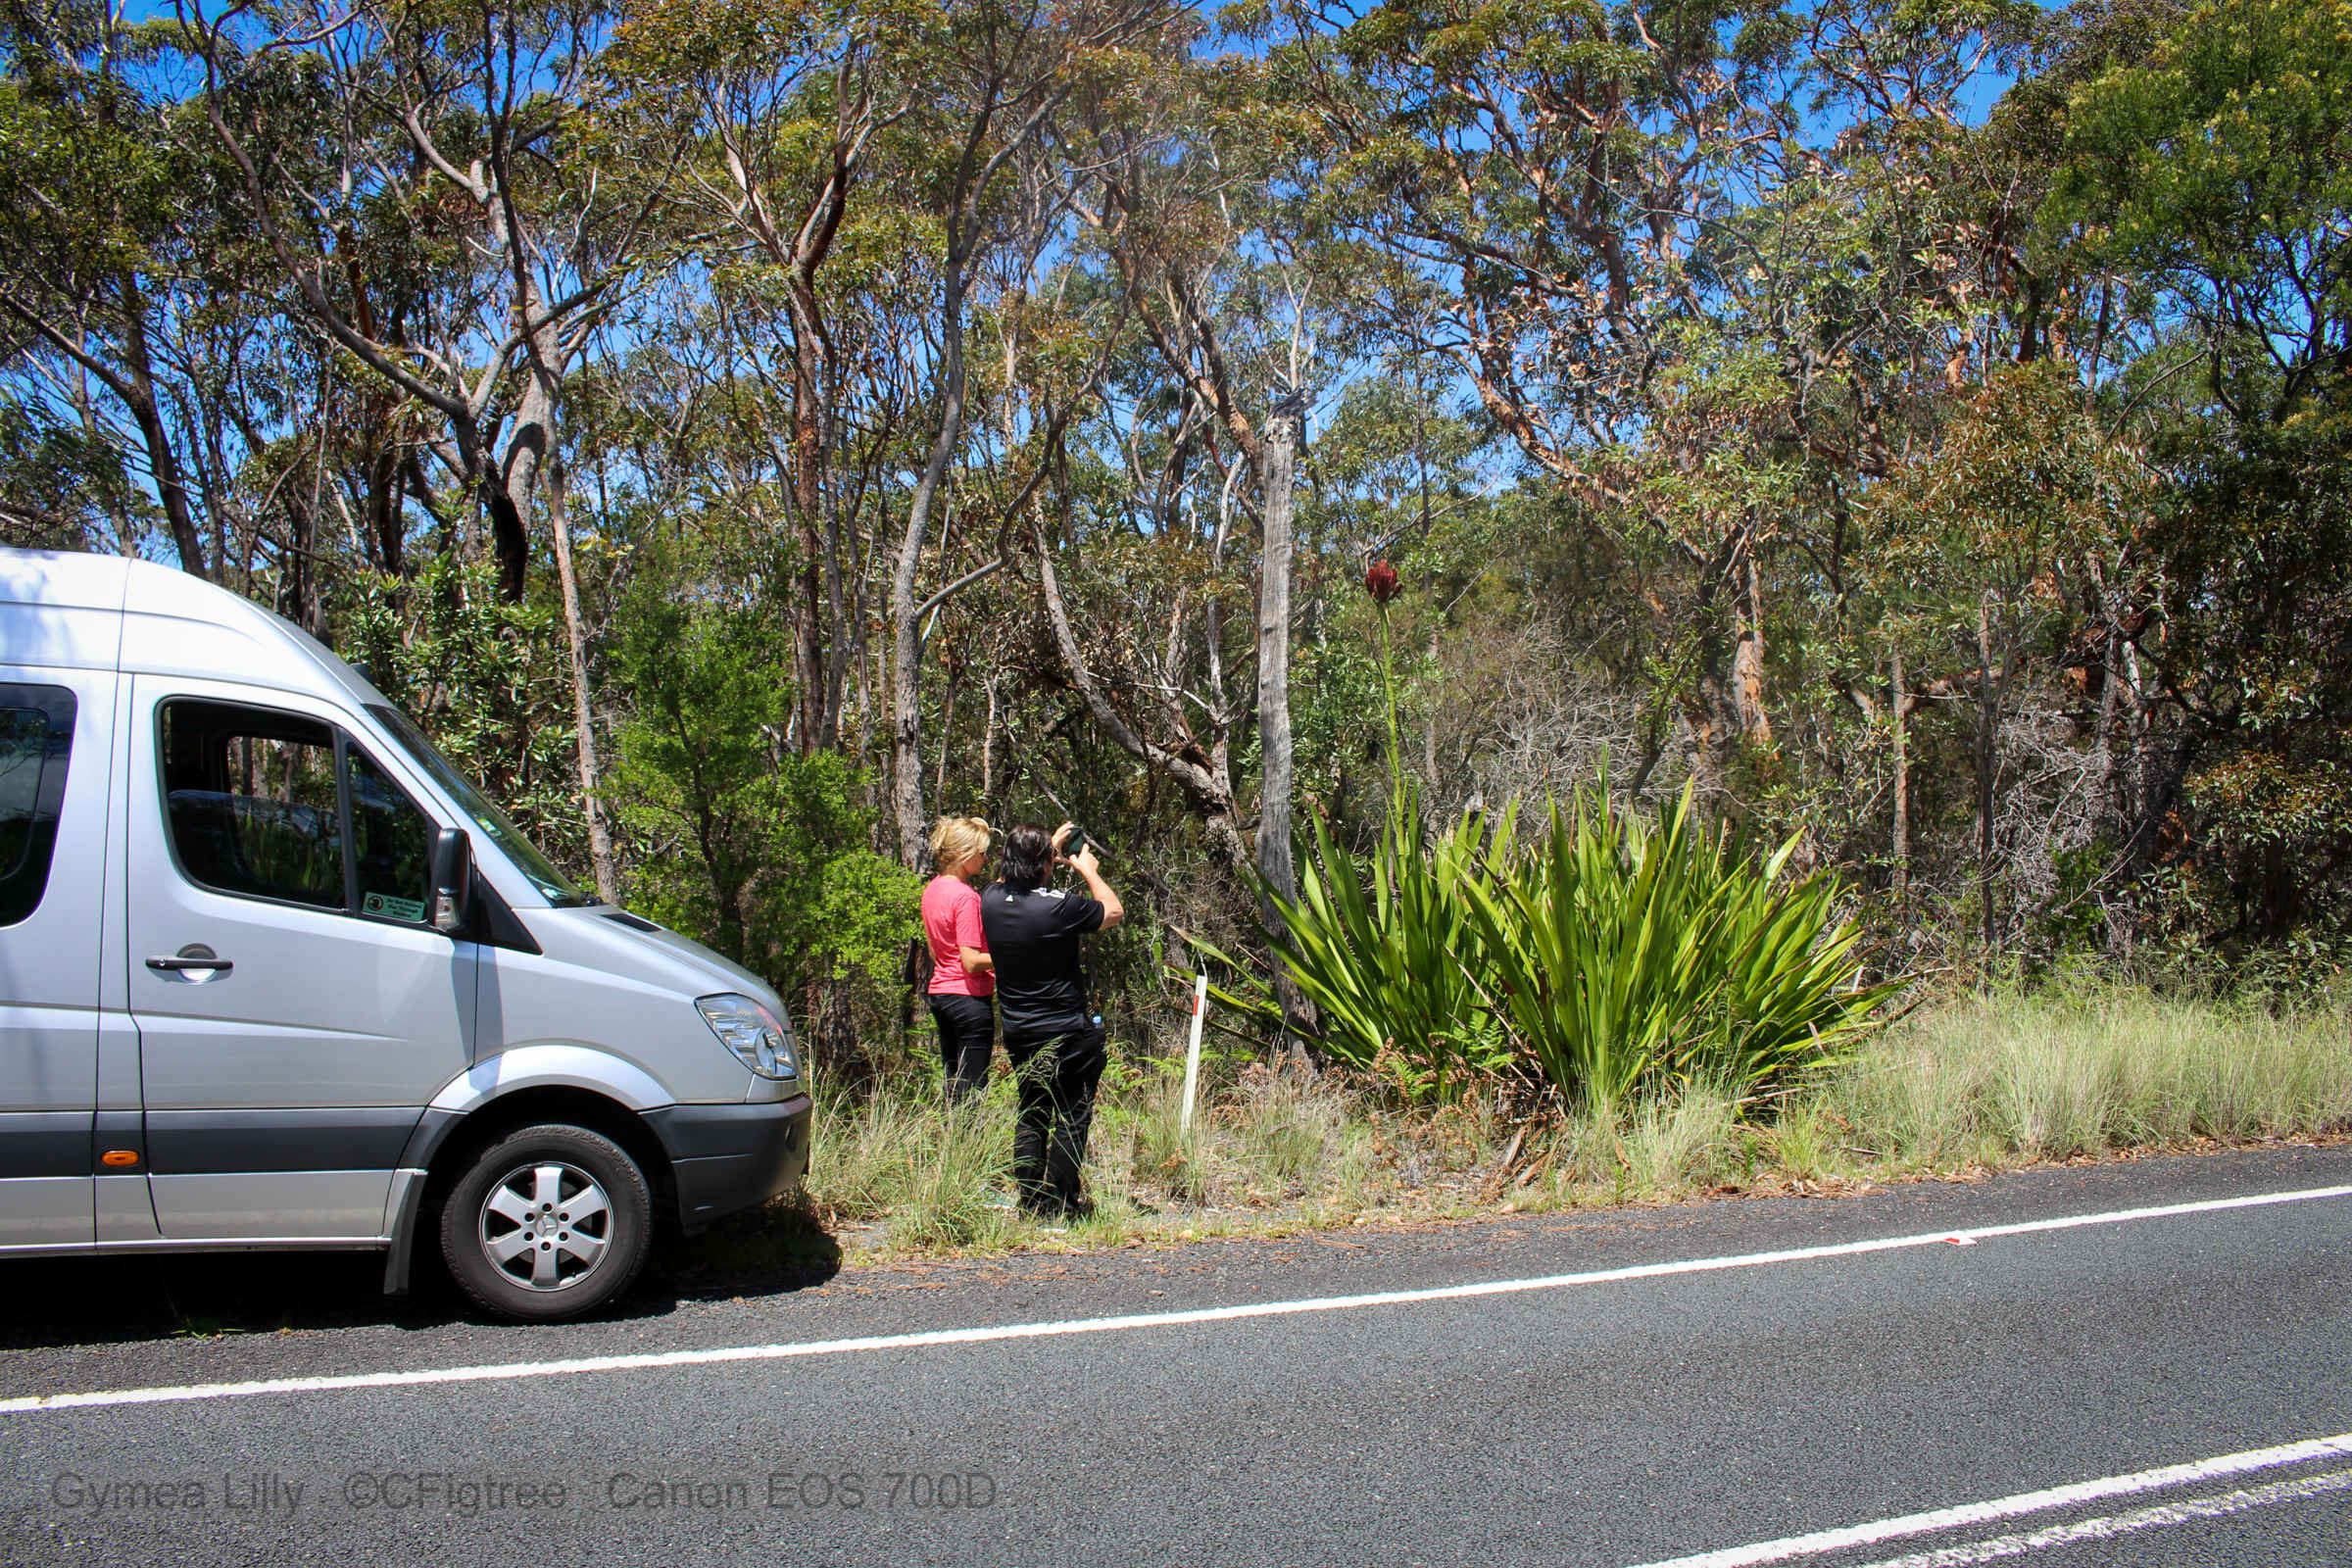 Royal National Park, Grand Pacific Drive, and Beaches